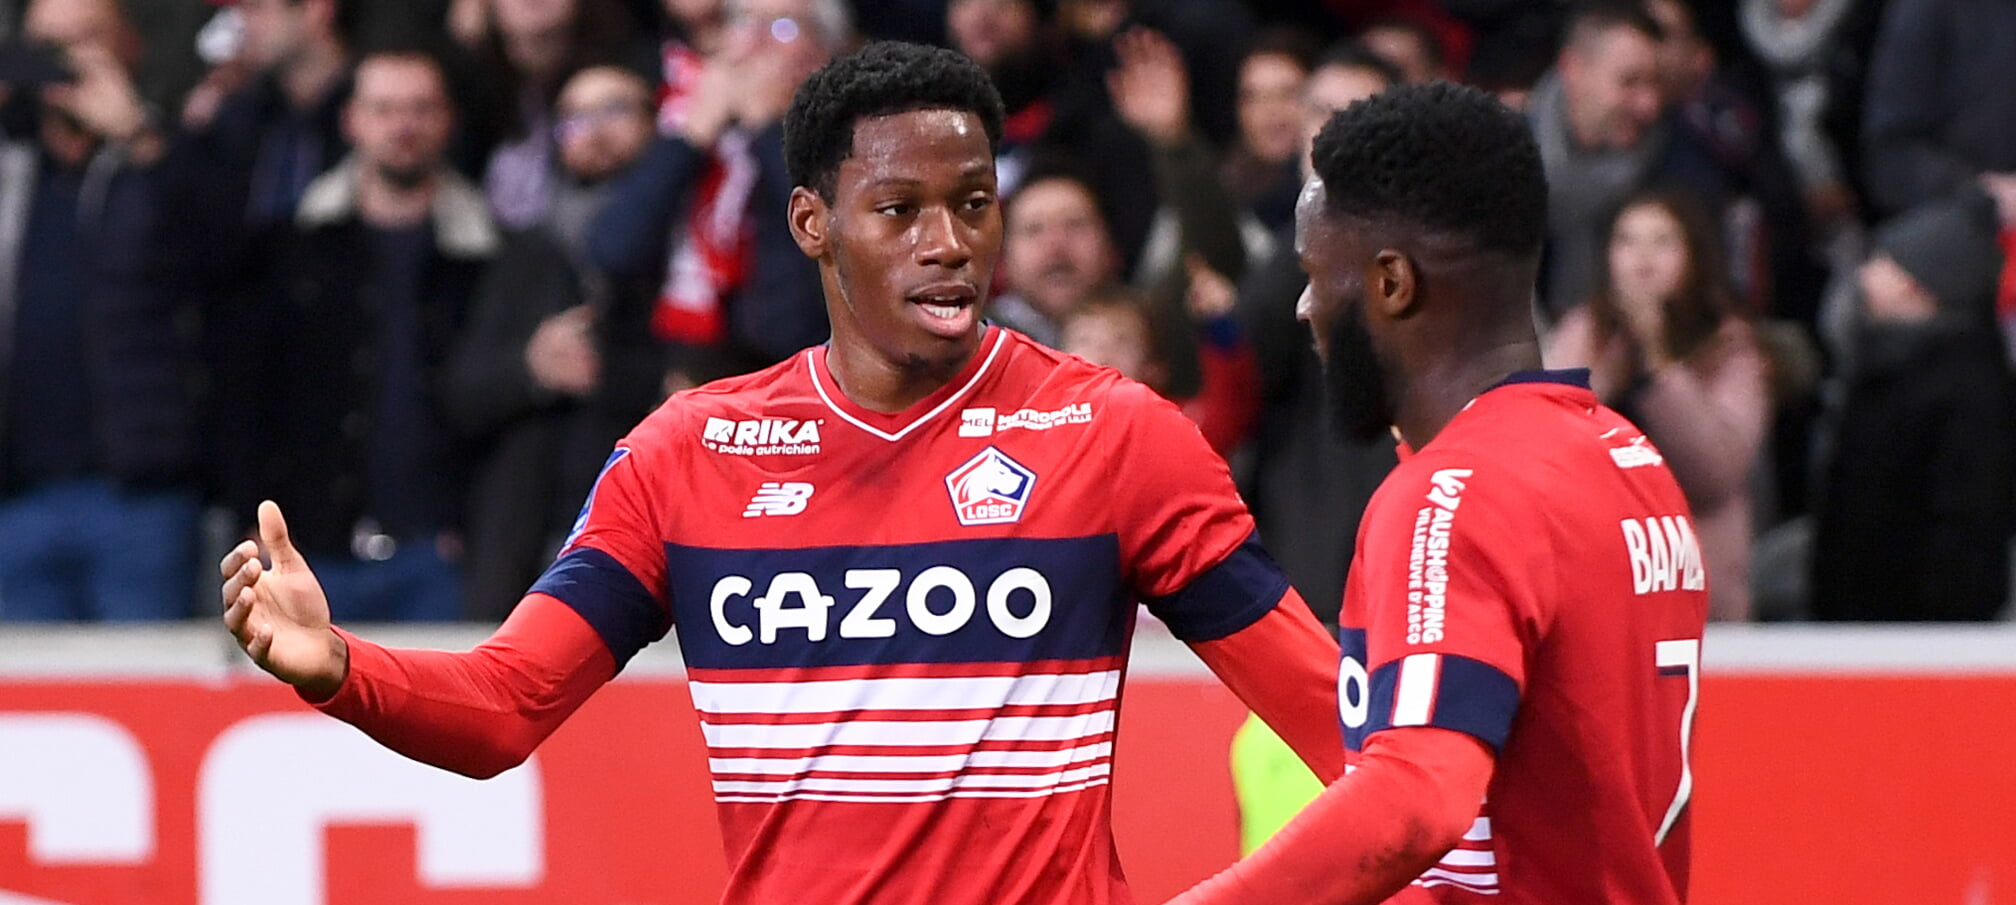 Lille-Troyes preview: Can David and les Dogues find bite?